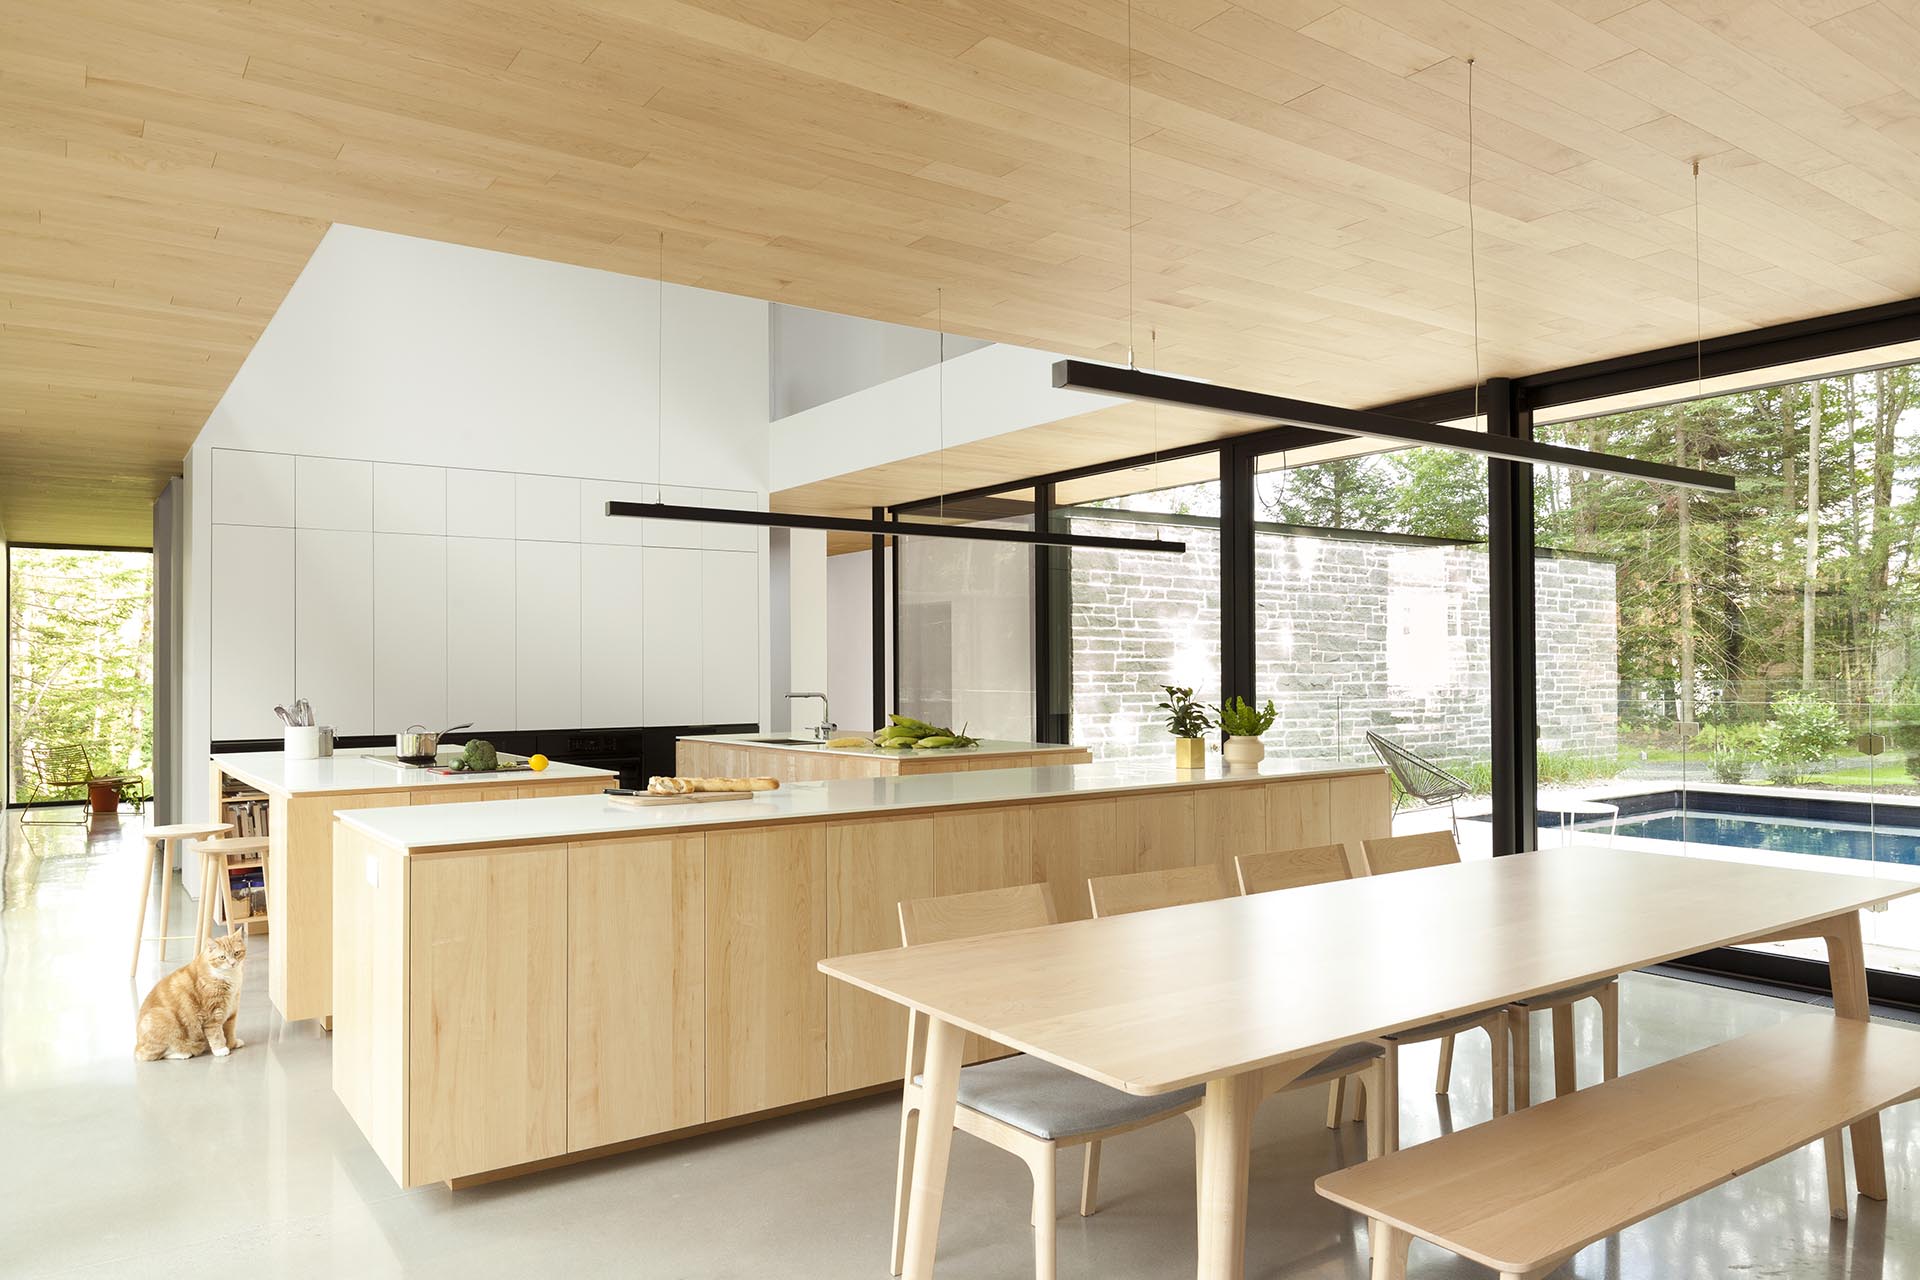 A modern kitchen with three kitchen islands with a light wood base and white countertops.